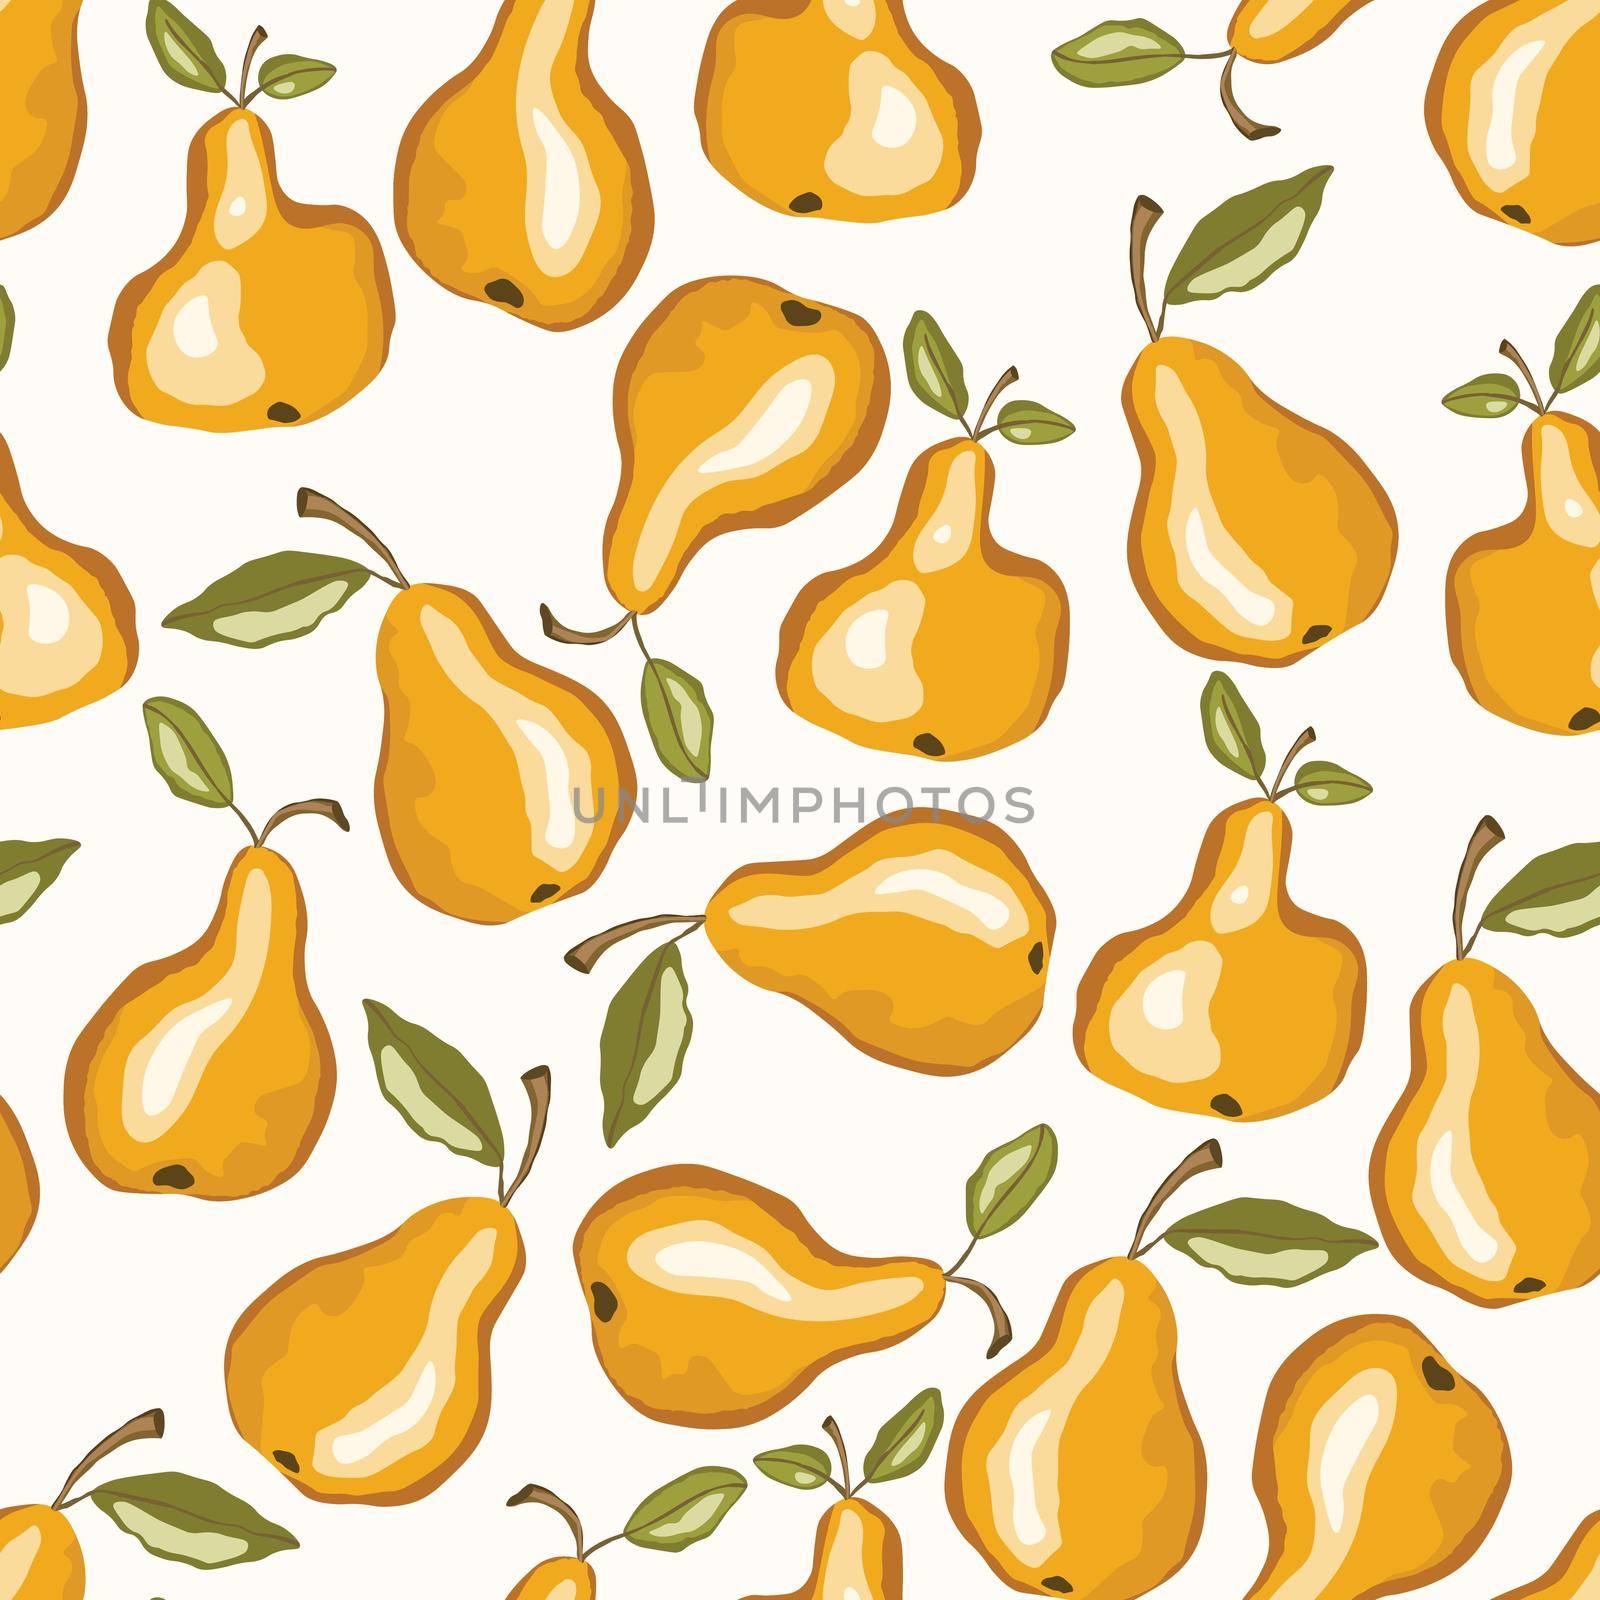 Seamless pattern with pear on white background. Natural delicious fresh ripe tasty fruit. Vector illustration for print, fabric, textile, other design. Stylized pears with leaves. Food concept.